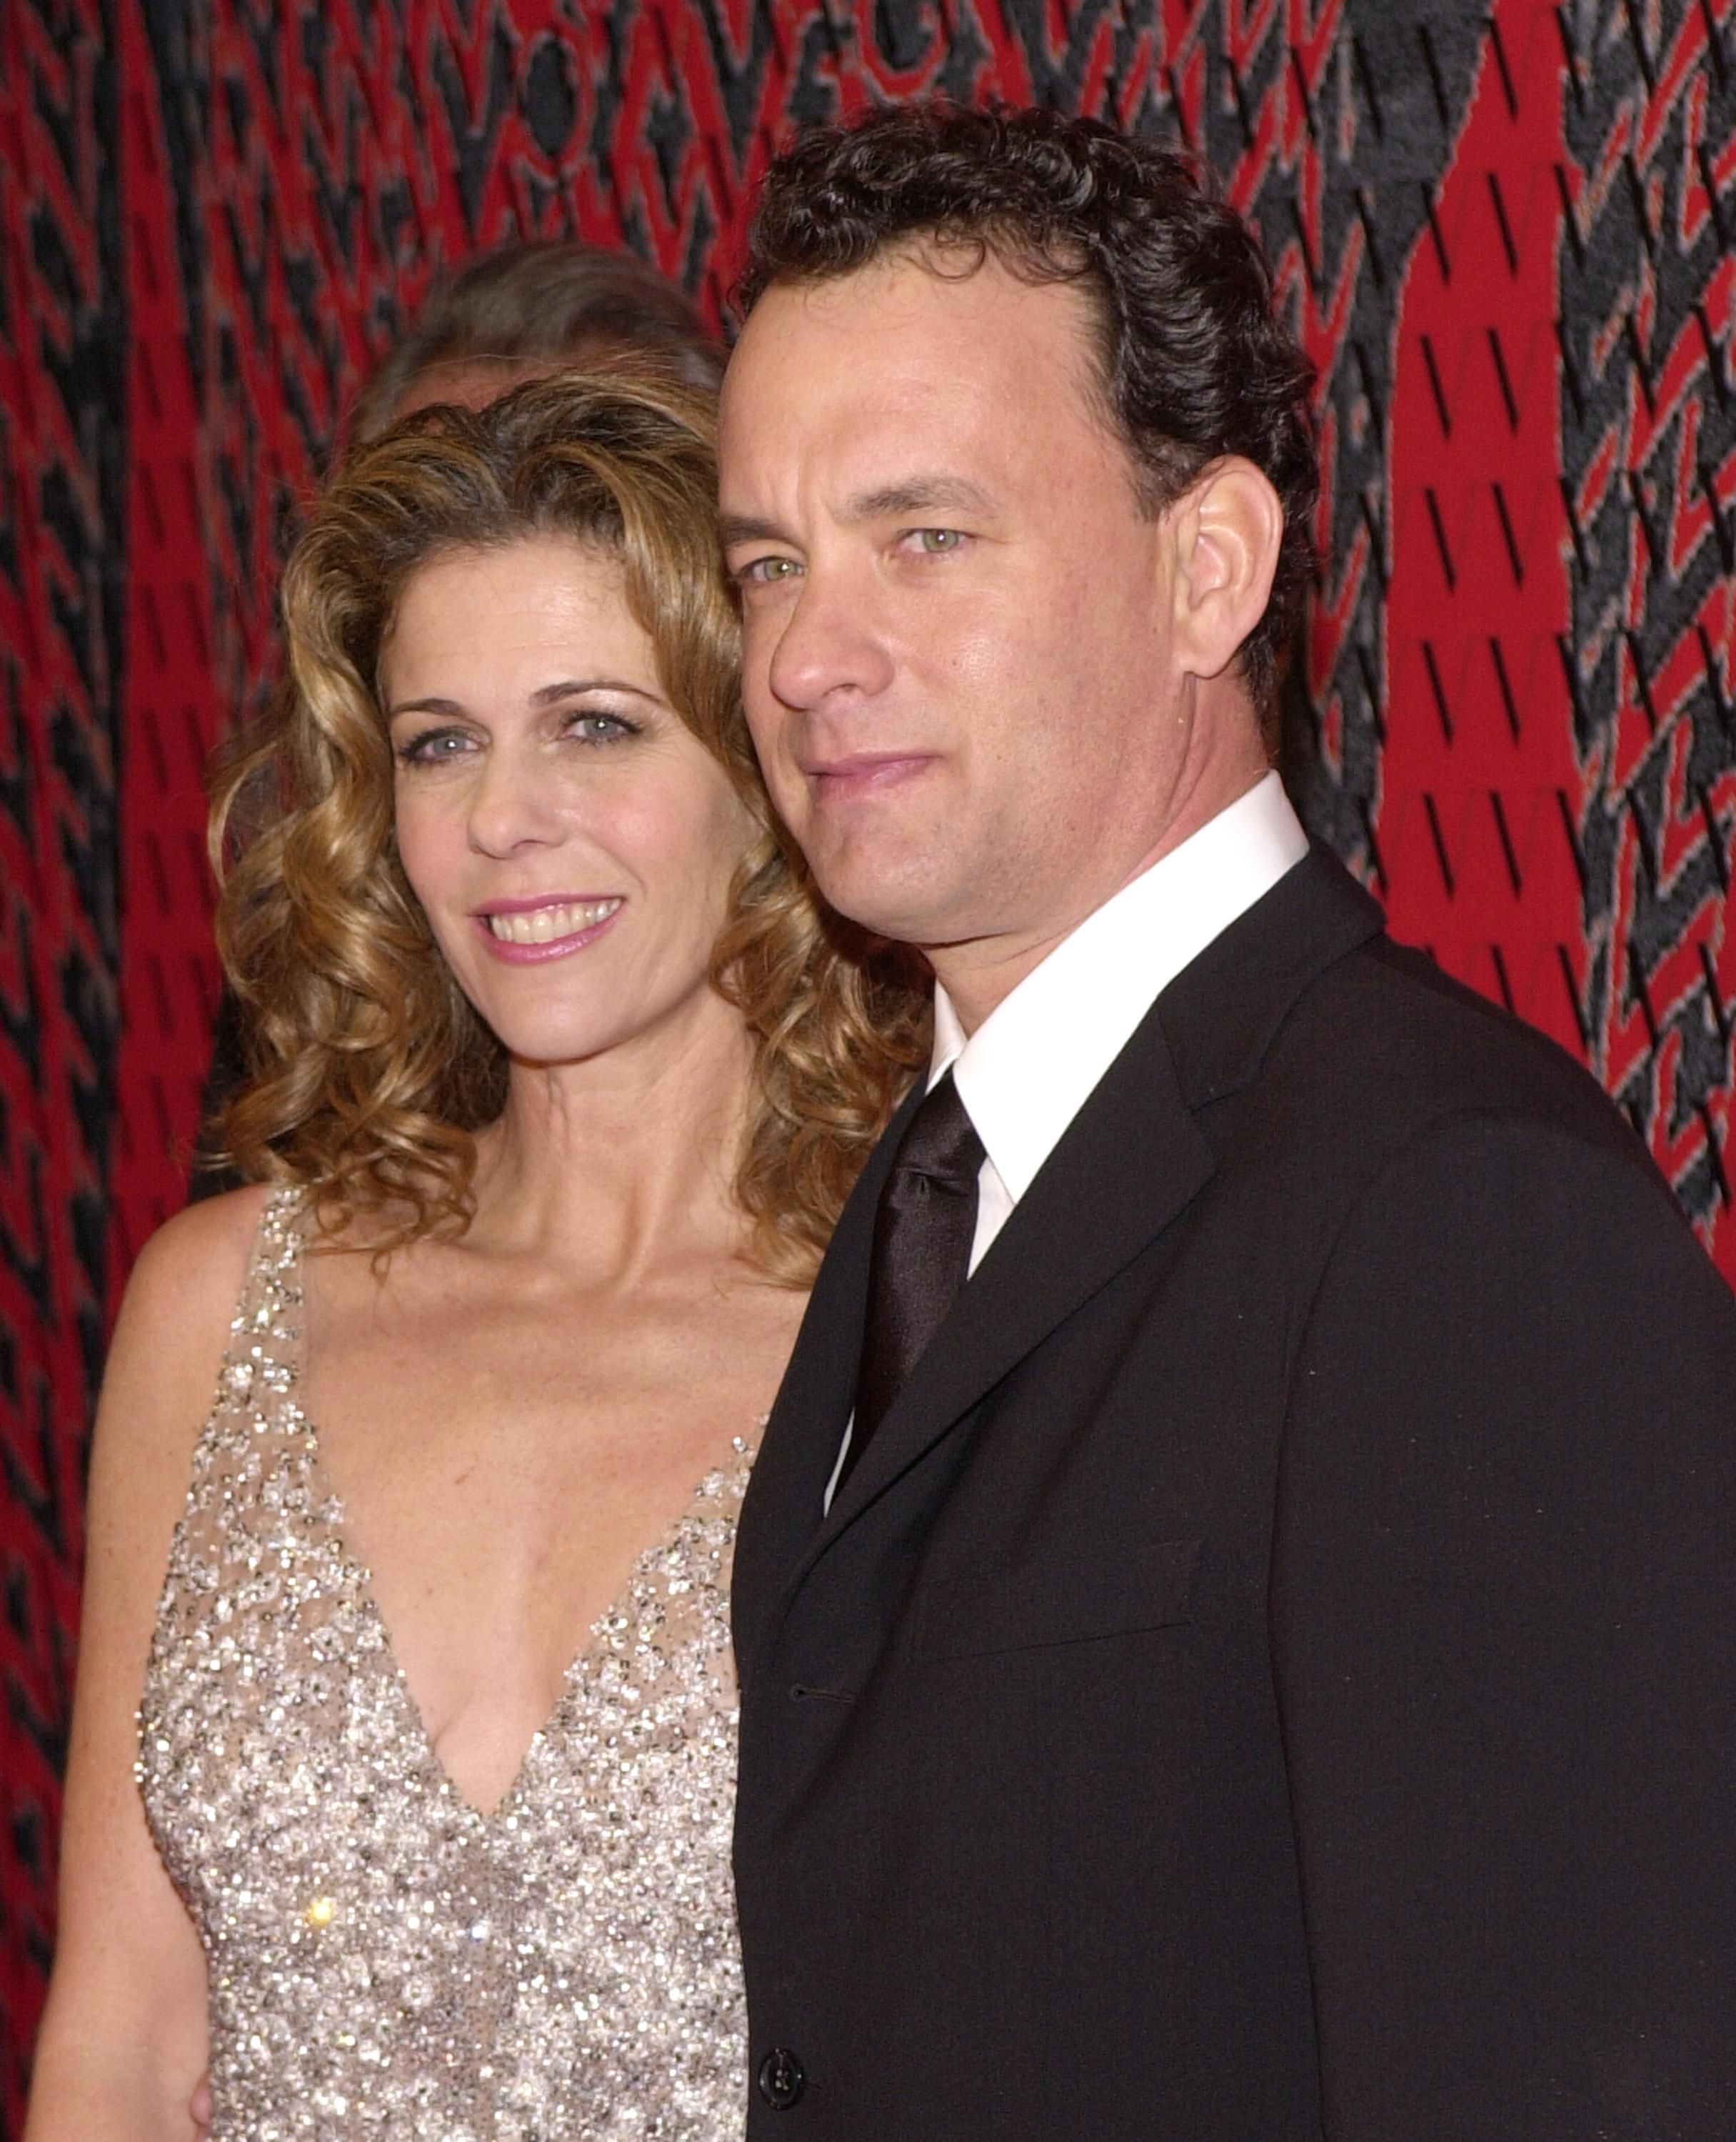 Tom Hanks and wife Rita Wilson arrive at Valentino's 40th Anniversary Los Angeles event November 17, 2000 at the Pacific Design Center in West Hollywood, CA | Photo: Getty Images